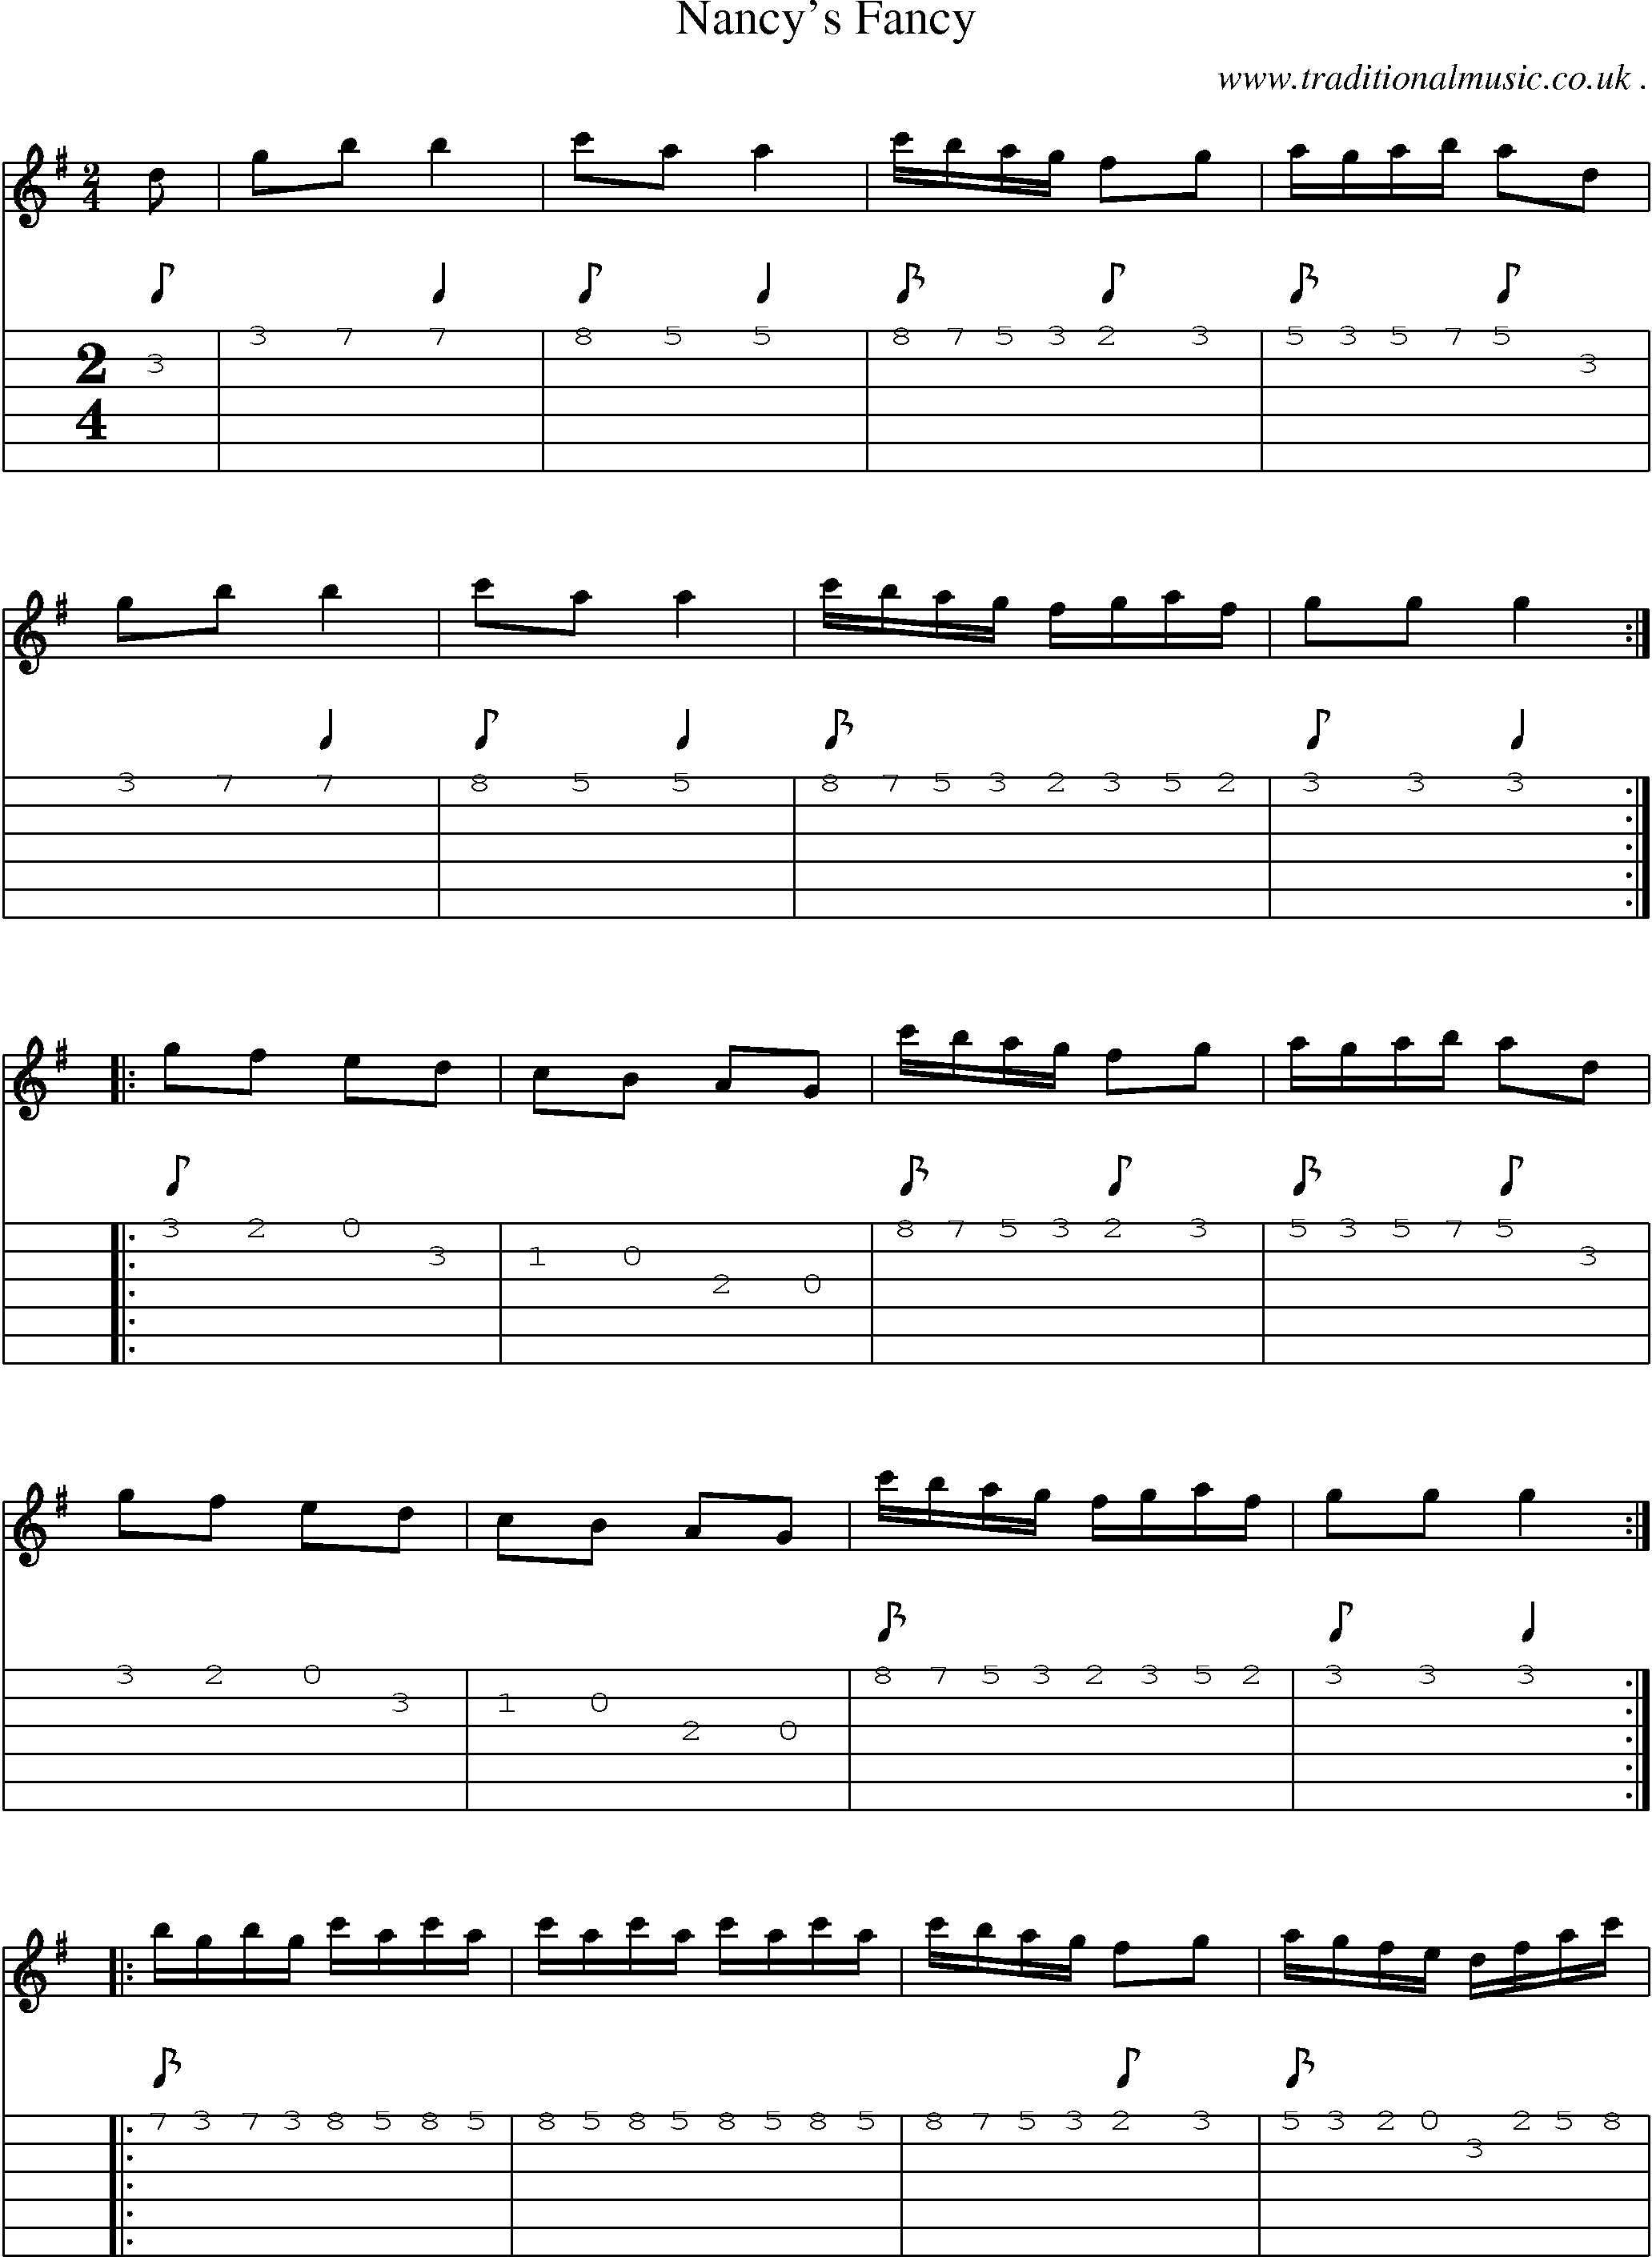 Sheet-Music and Guitar Tabs for Nancys Fancy